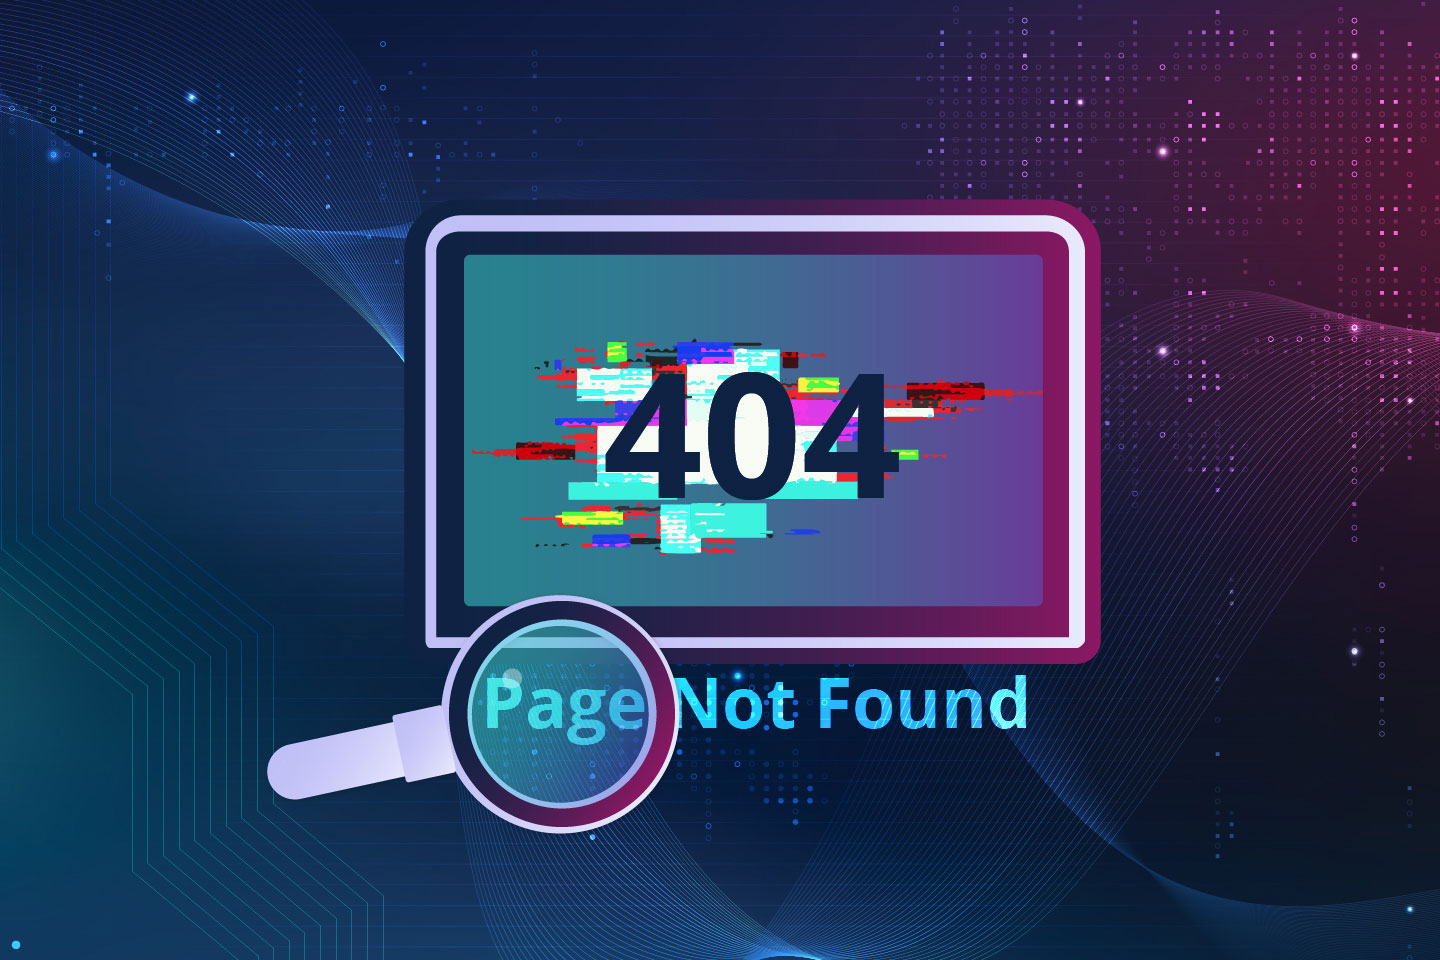 Illustration of a 404 website page with a broken light bulb in the background